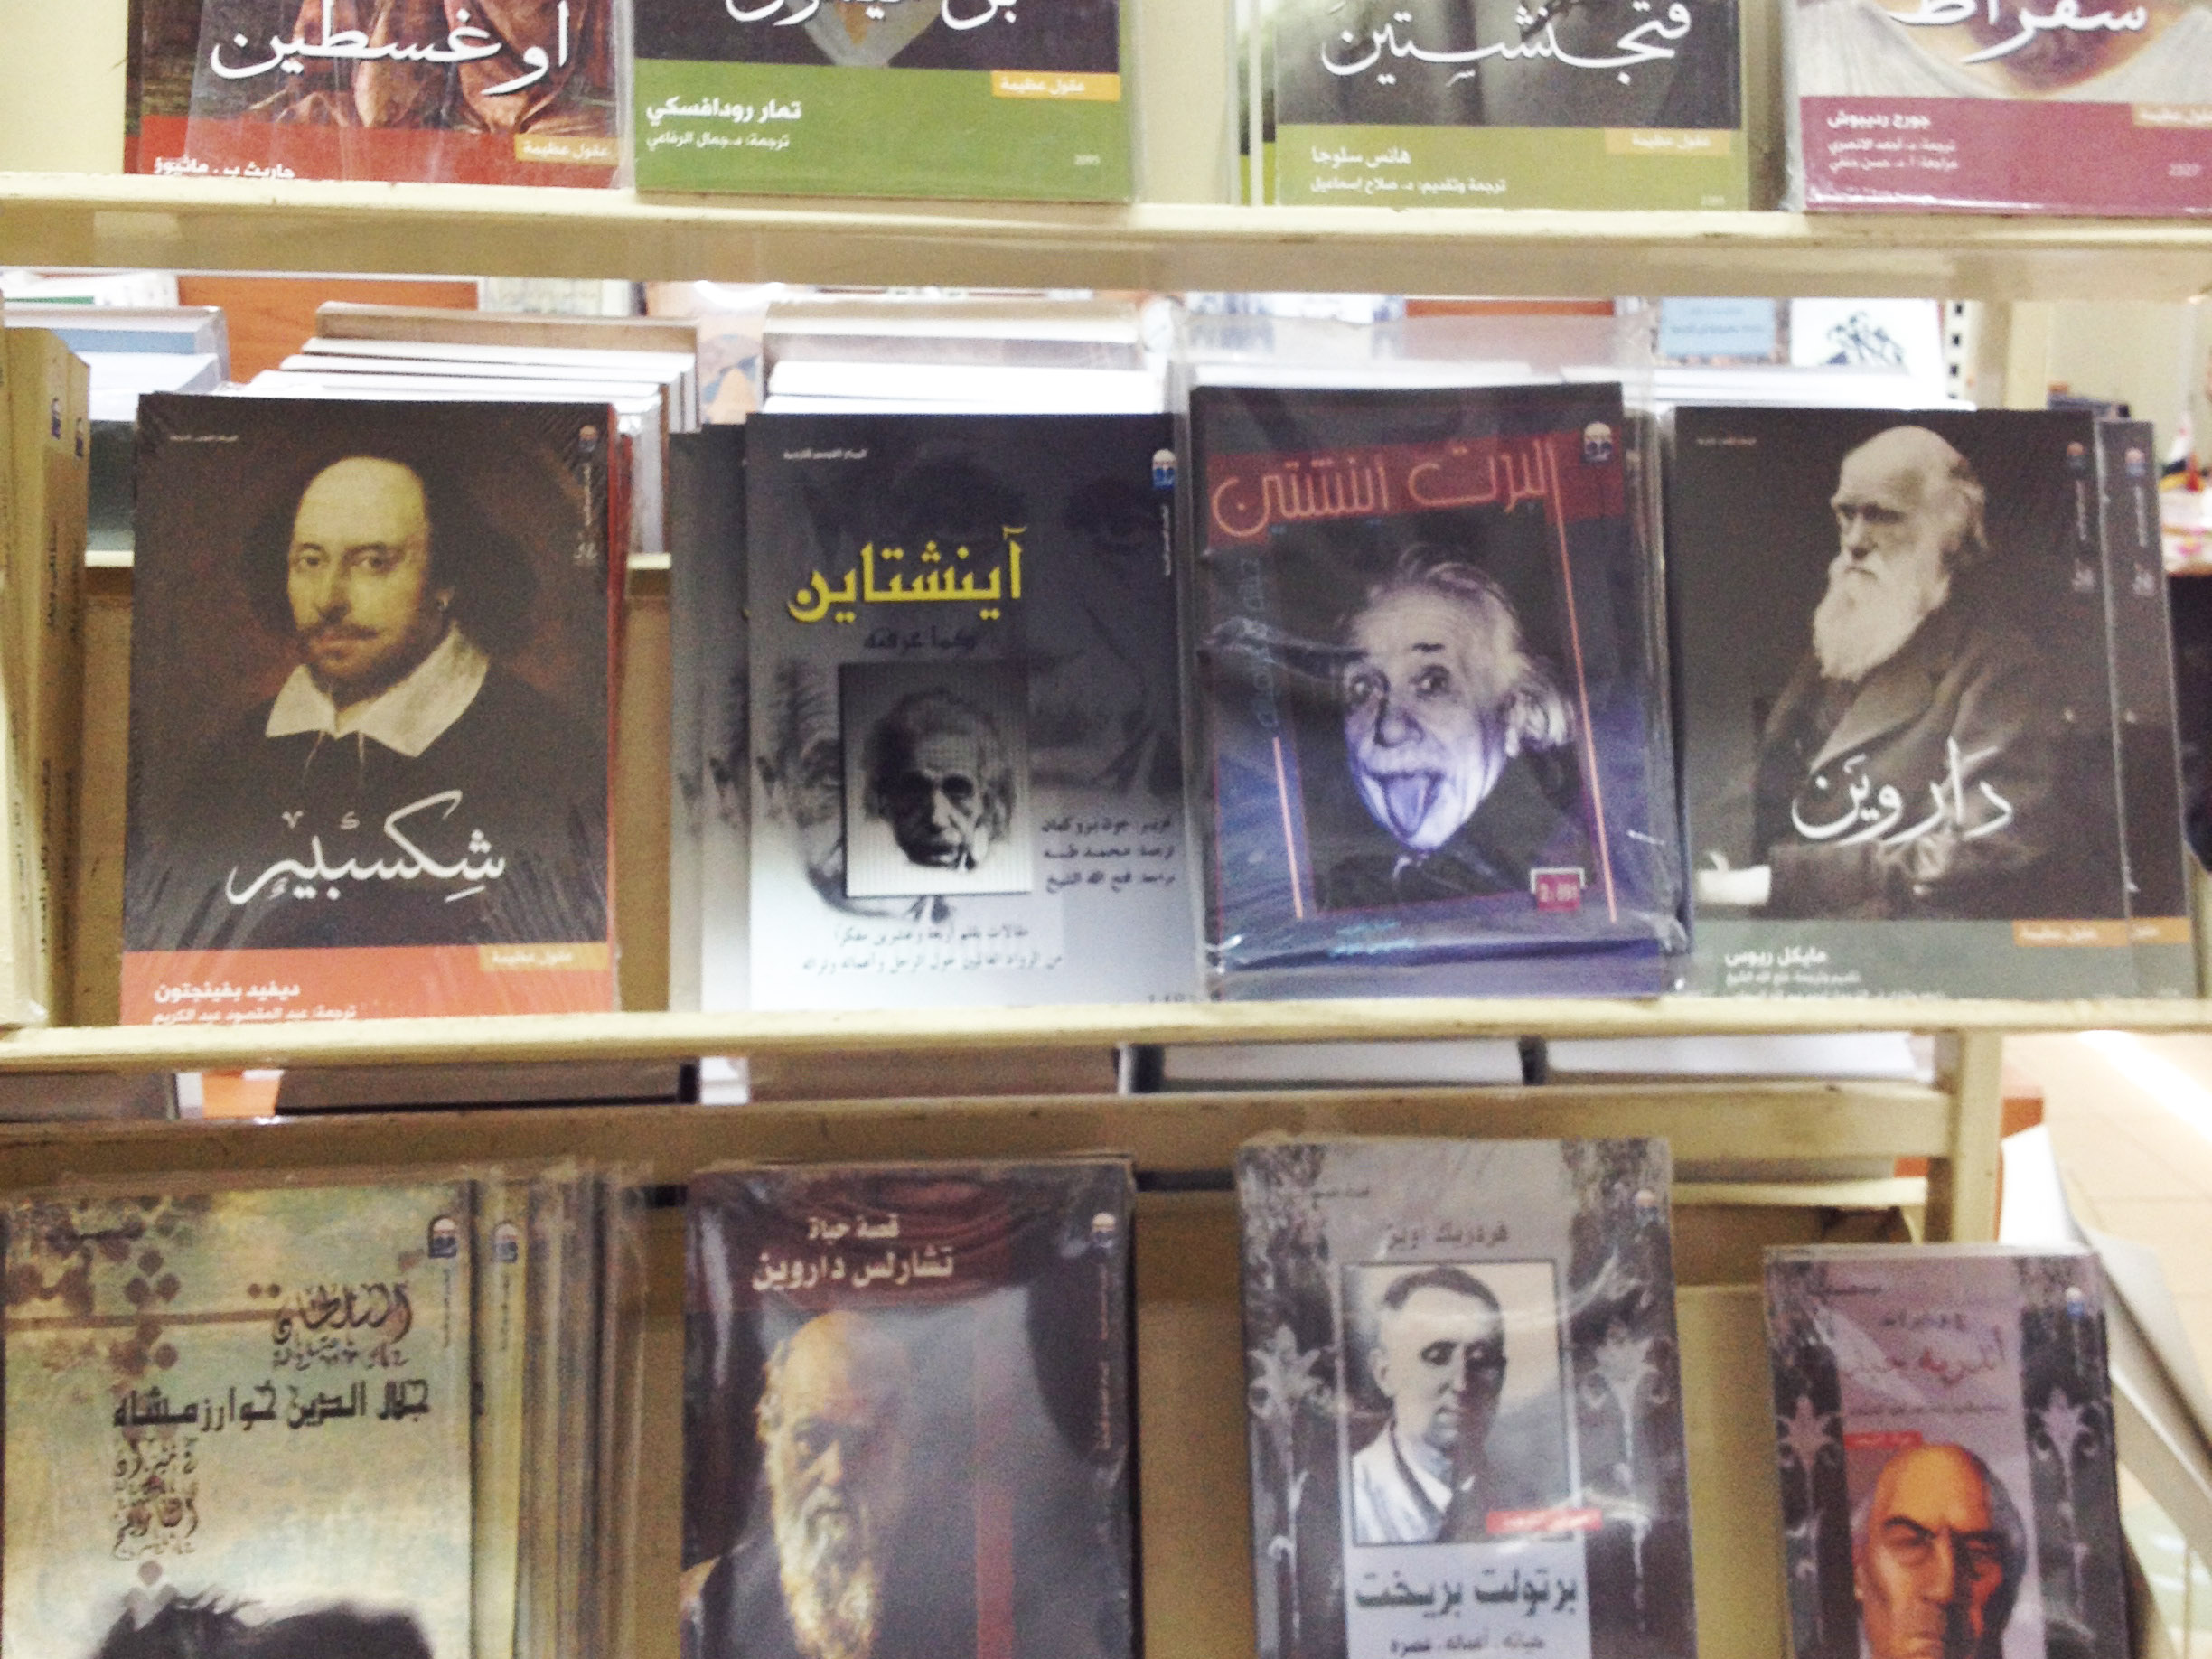 Egypt’s Intellectual Situation